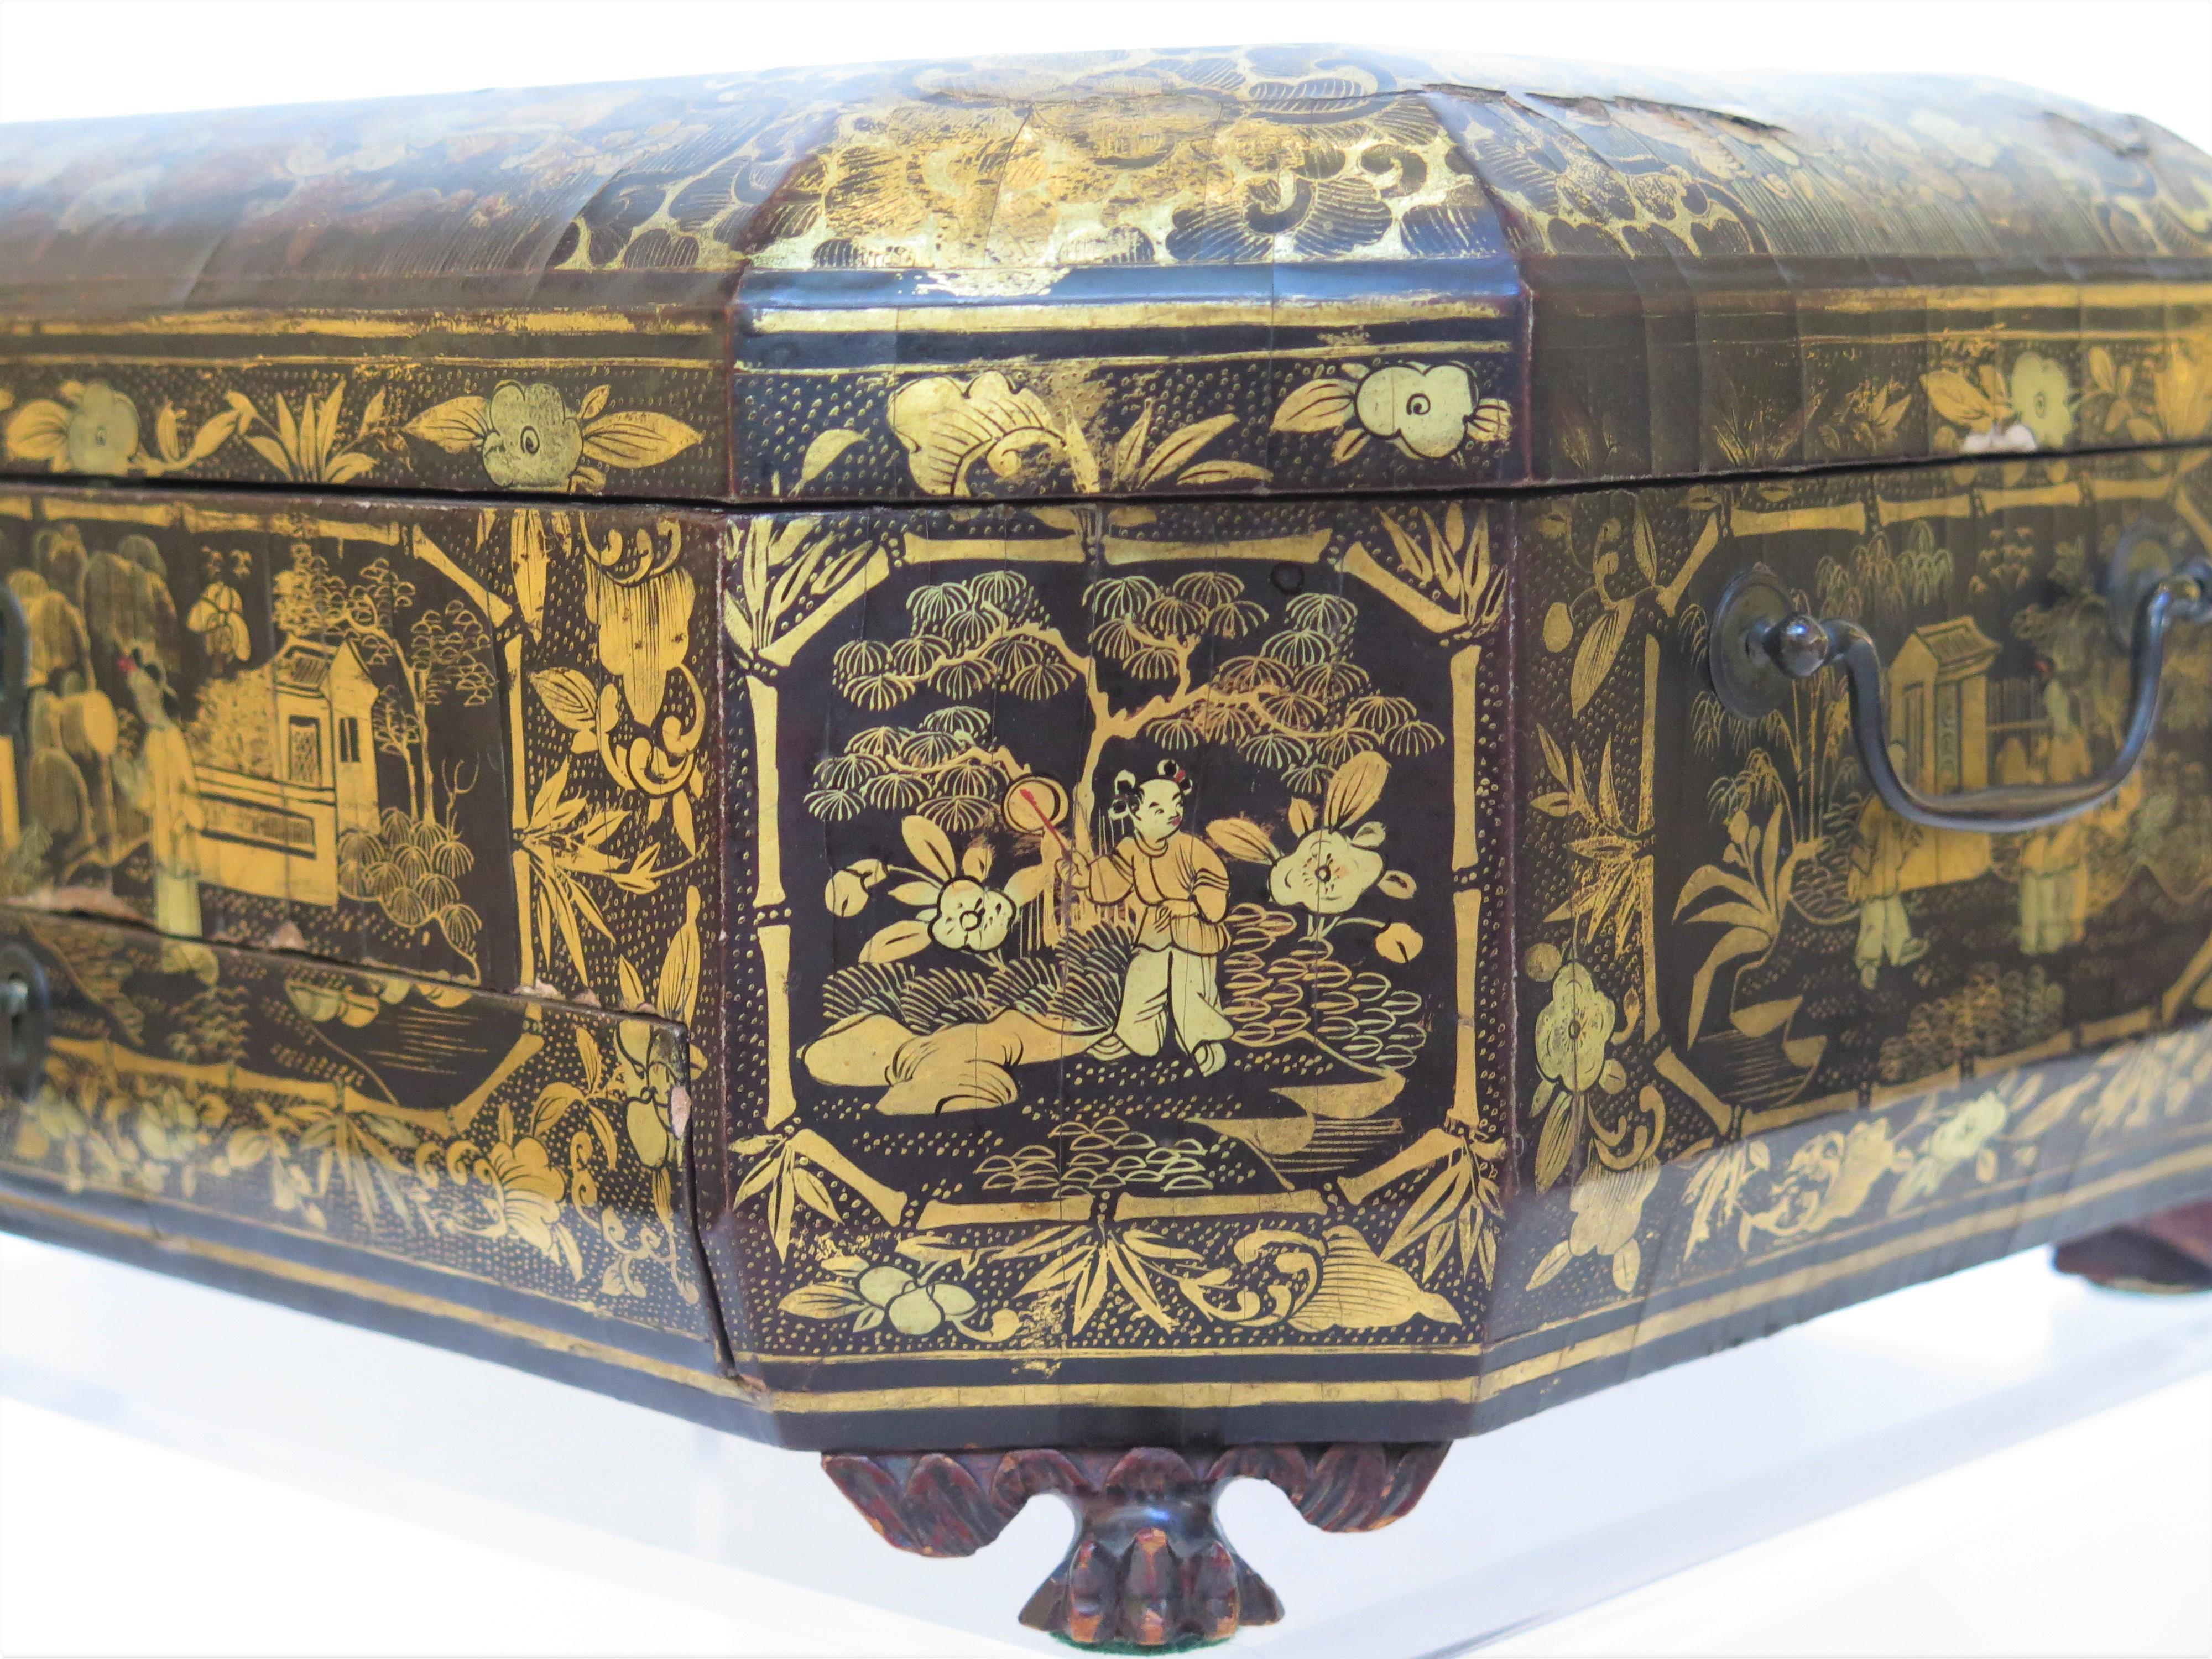 Ealy 19th Century Chinese Export Lacquer Sewing Box For Sale 3